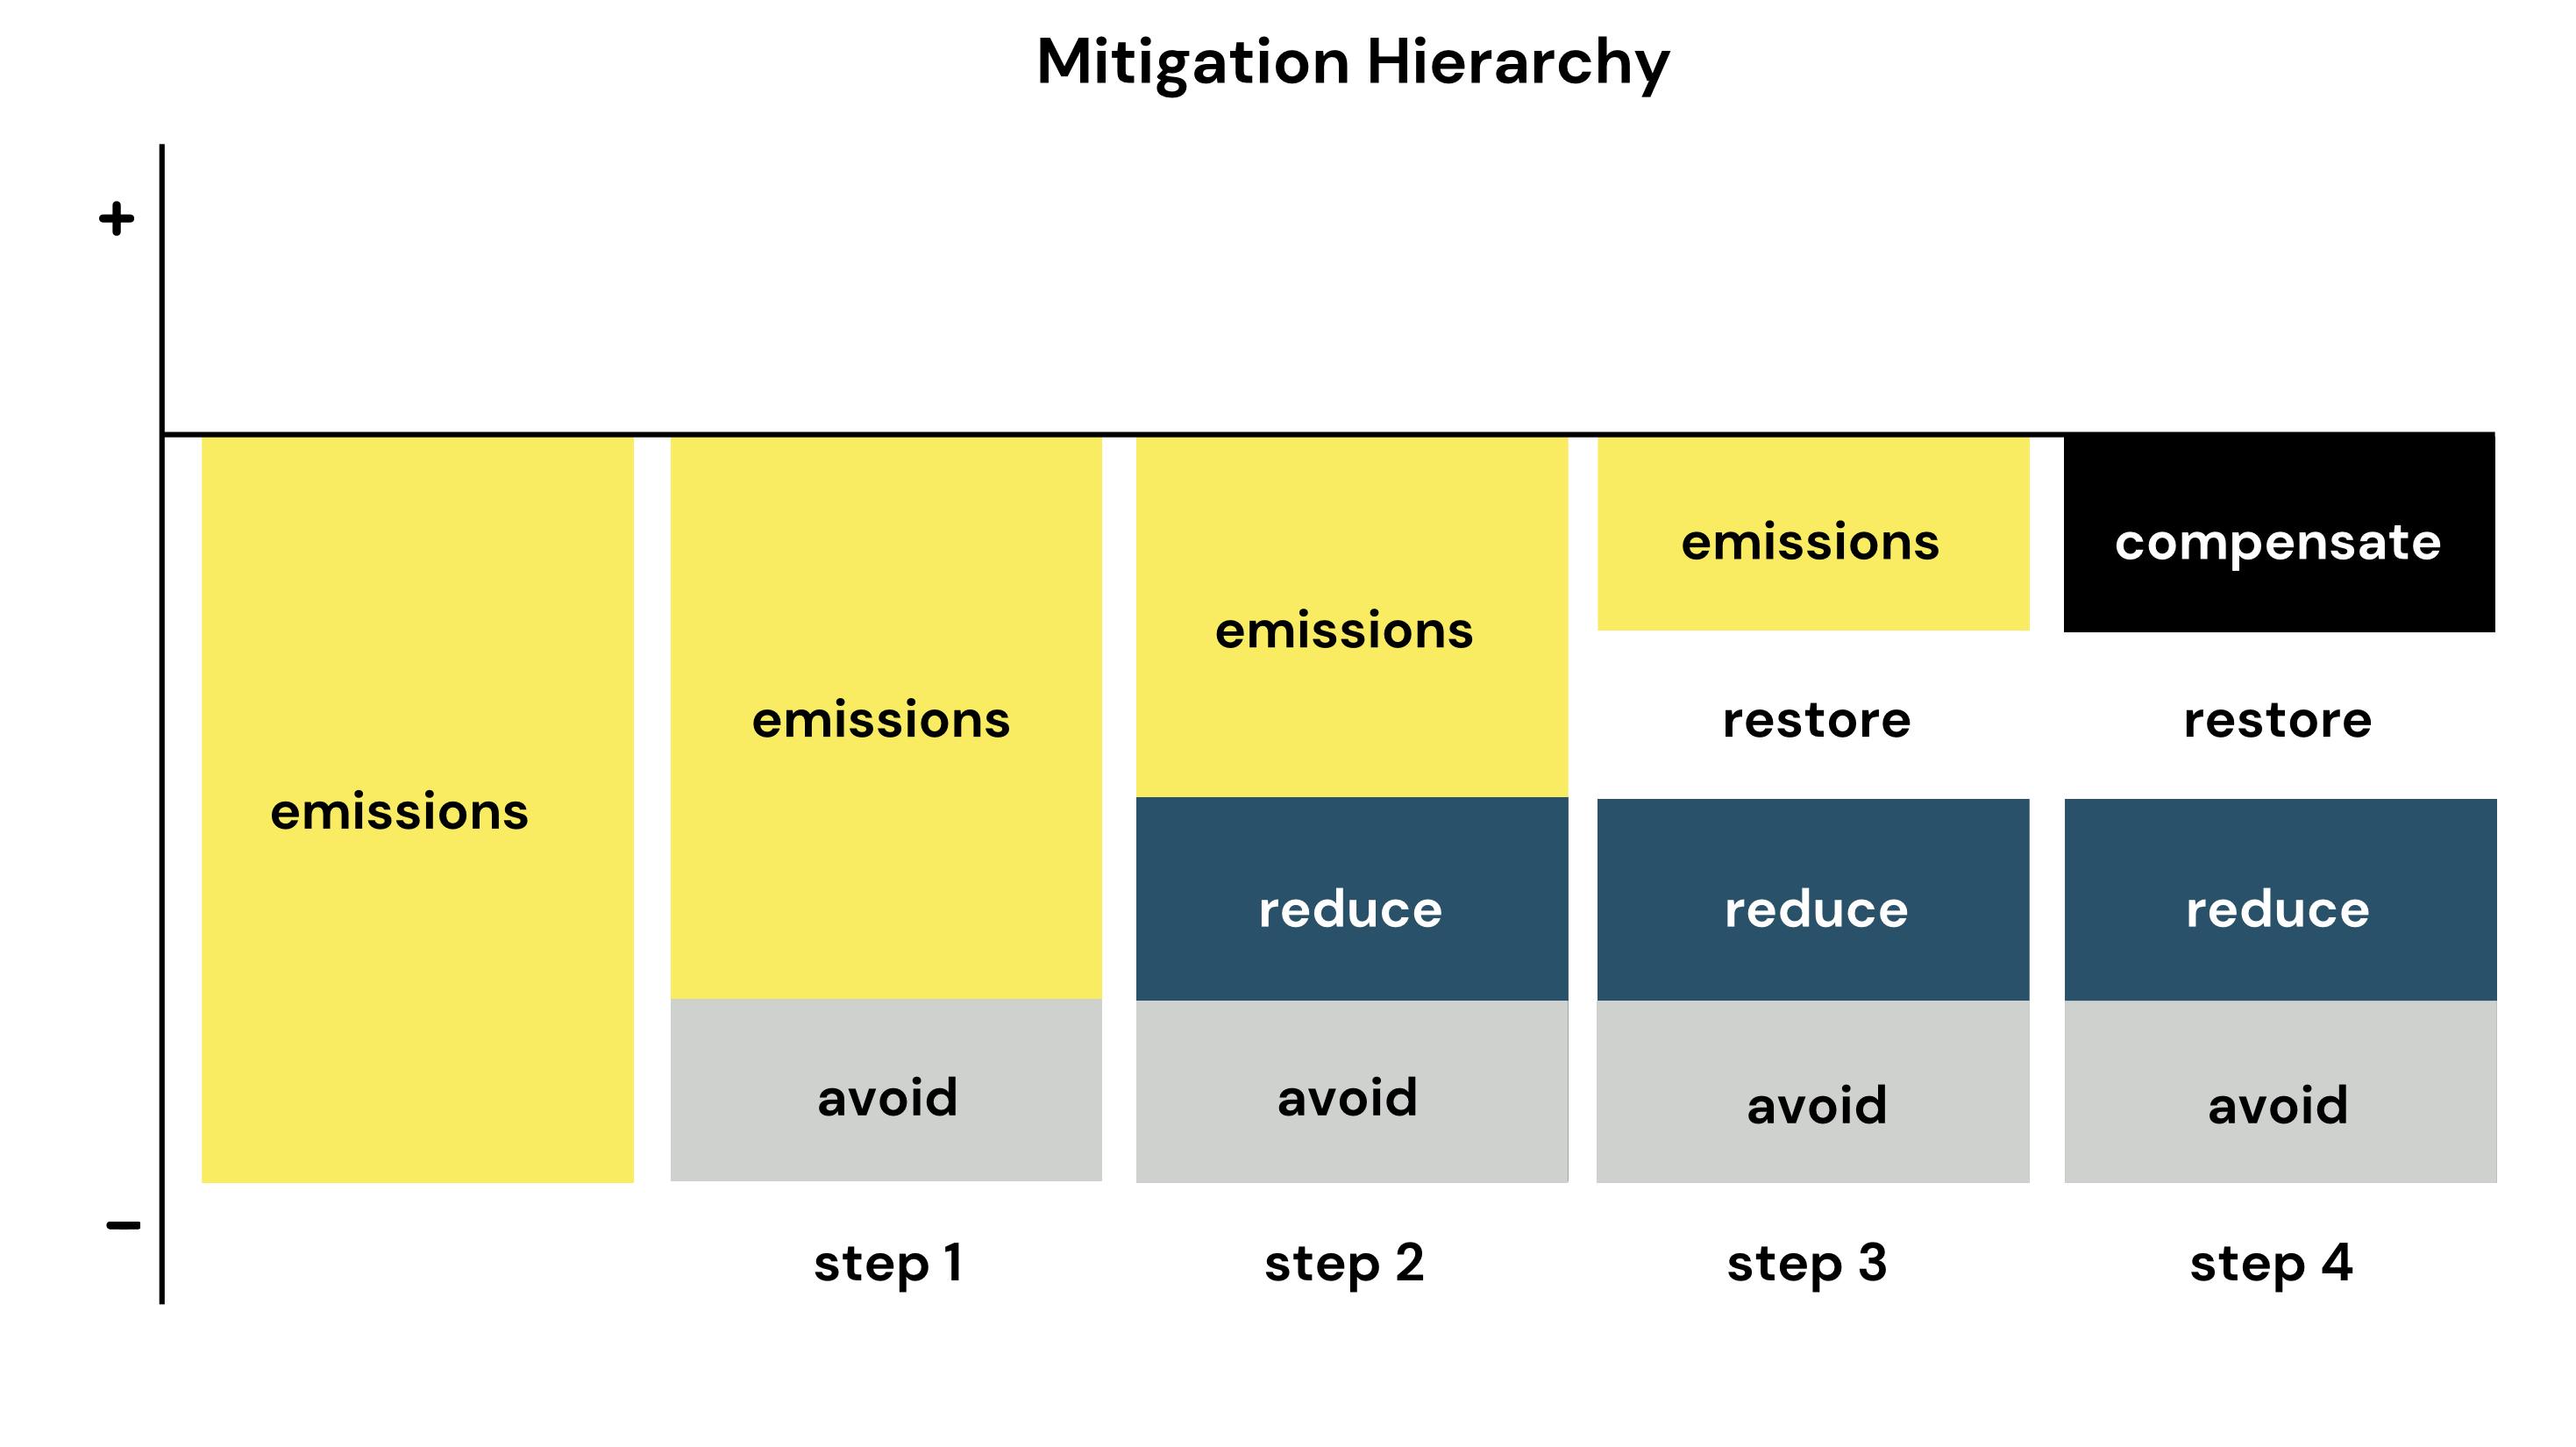 A graphic showing the Mitigation Hierarachy